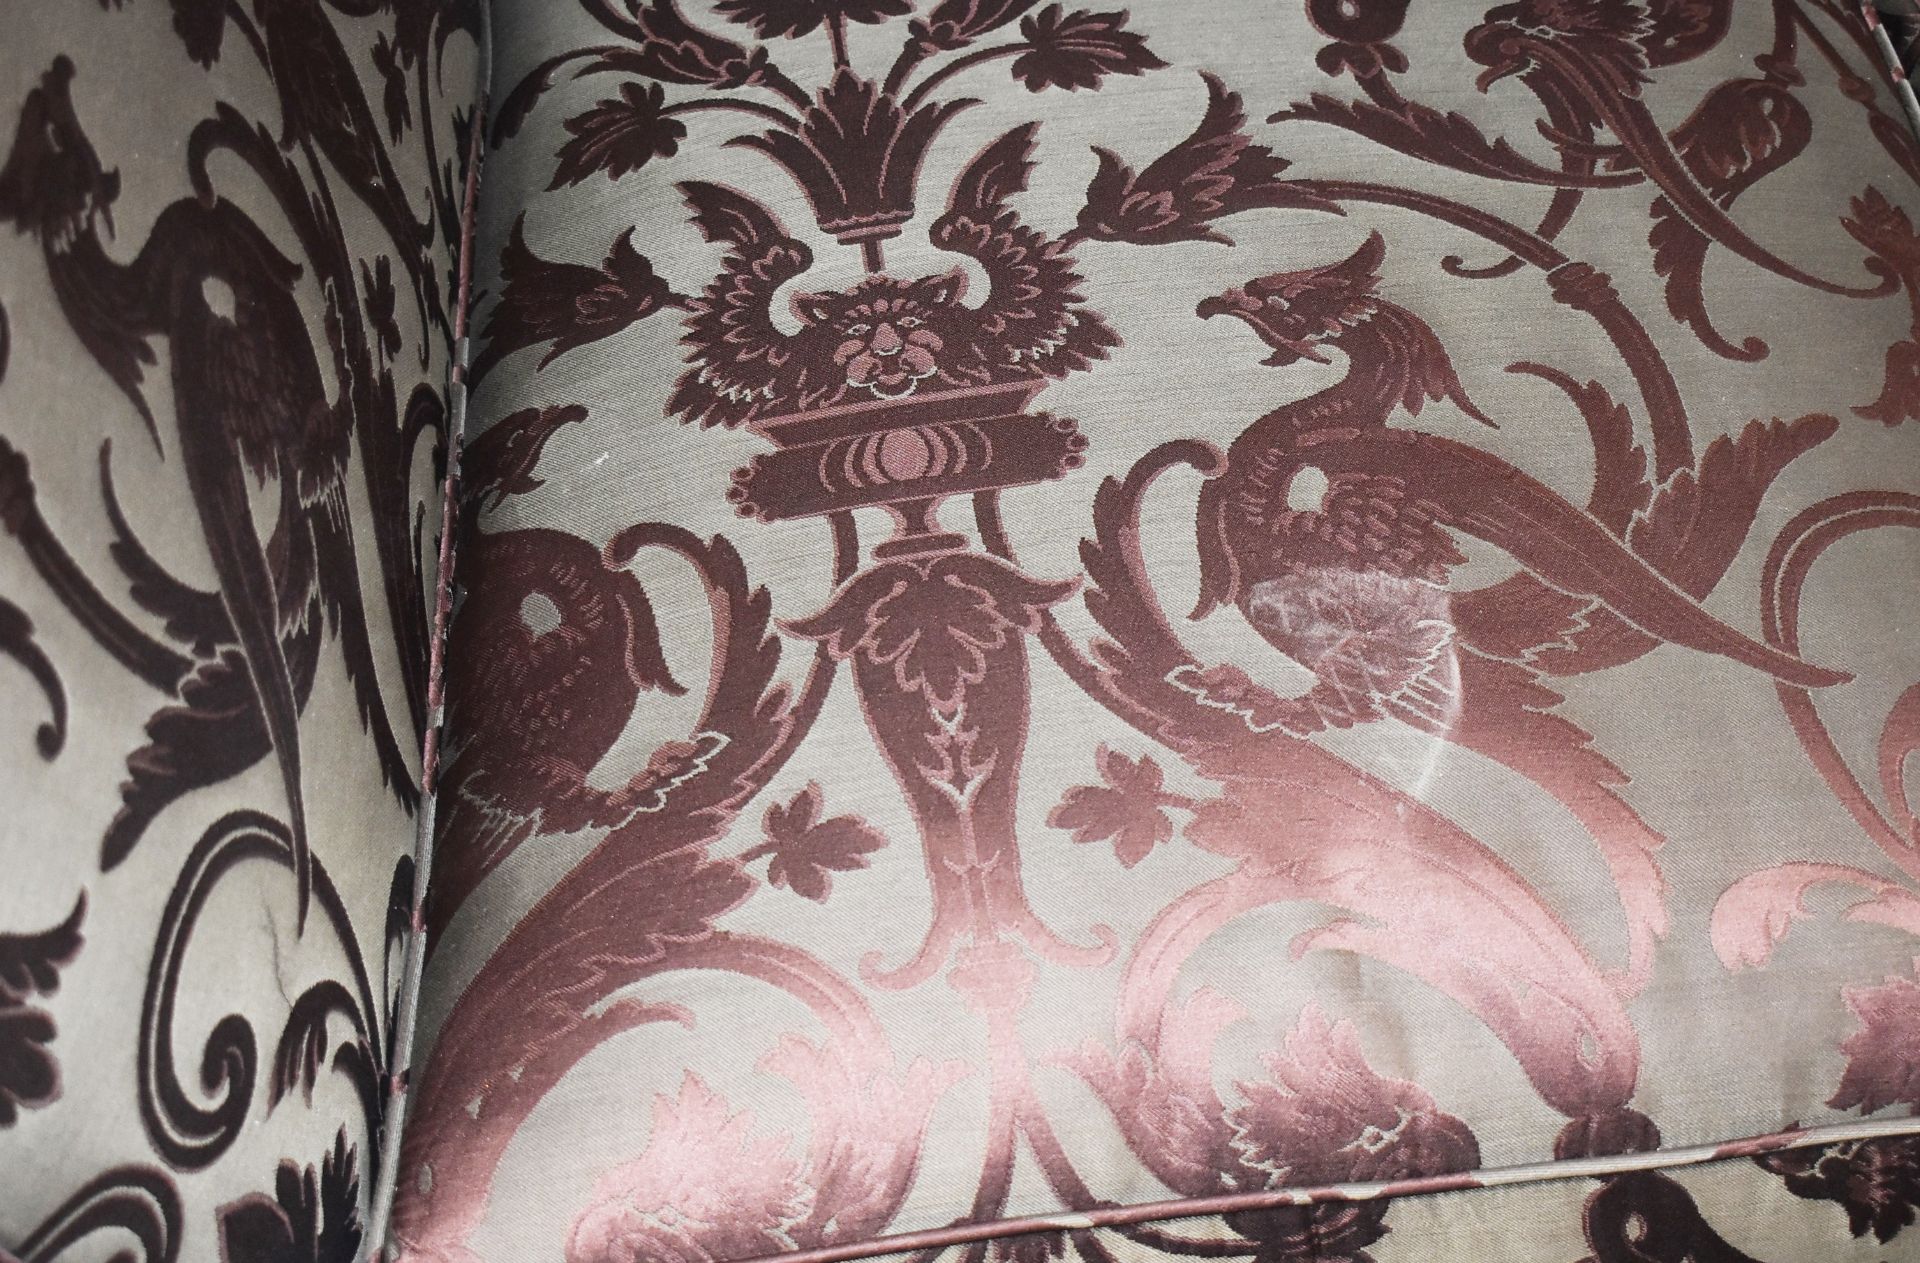 1 x DONGHIA John Hutton Designed 3 Seater Sofa, Rose & Cream Mythical & Frond Print With Wood Legs - Image 7 of 9